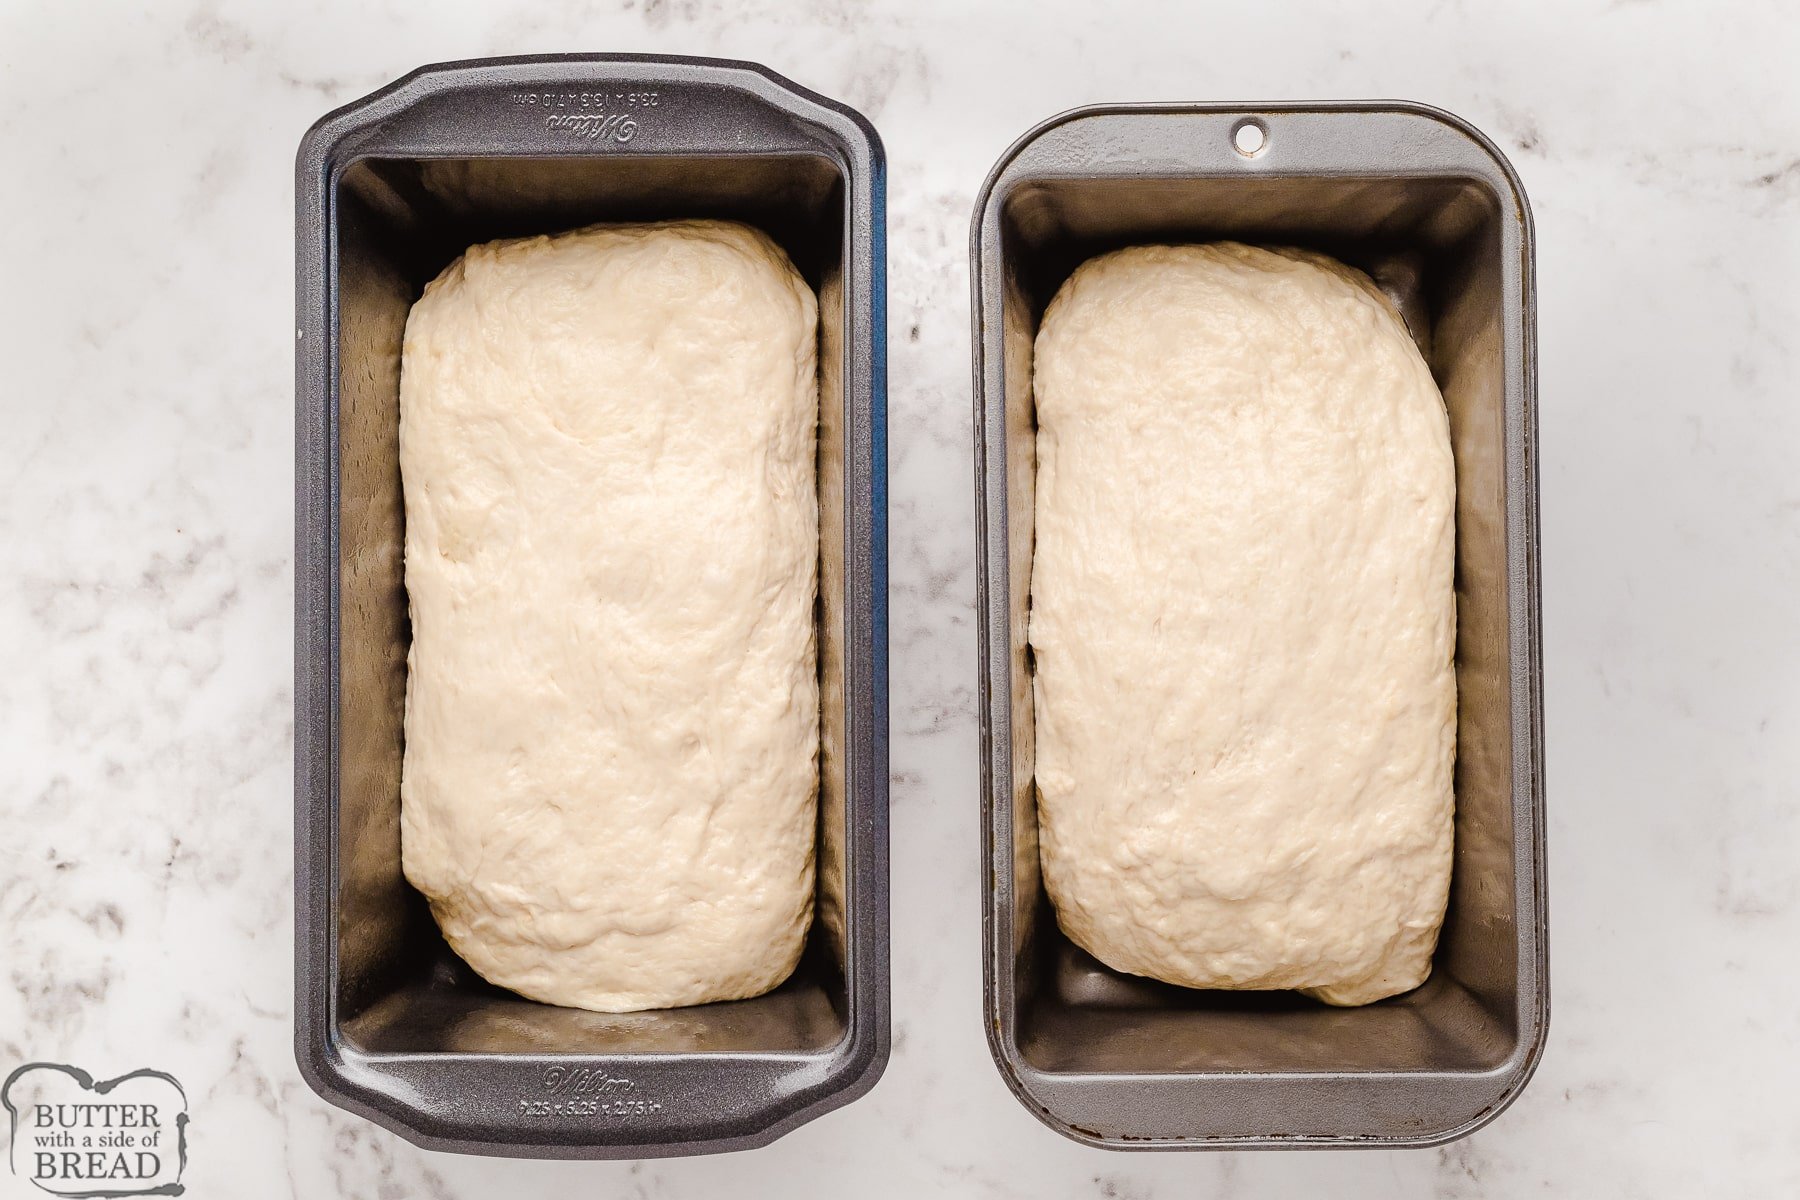 shaping your bread dough and putting them into pans